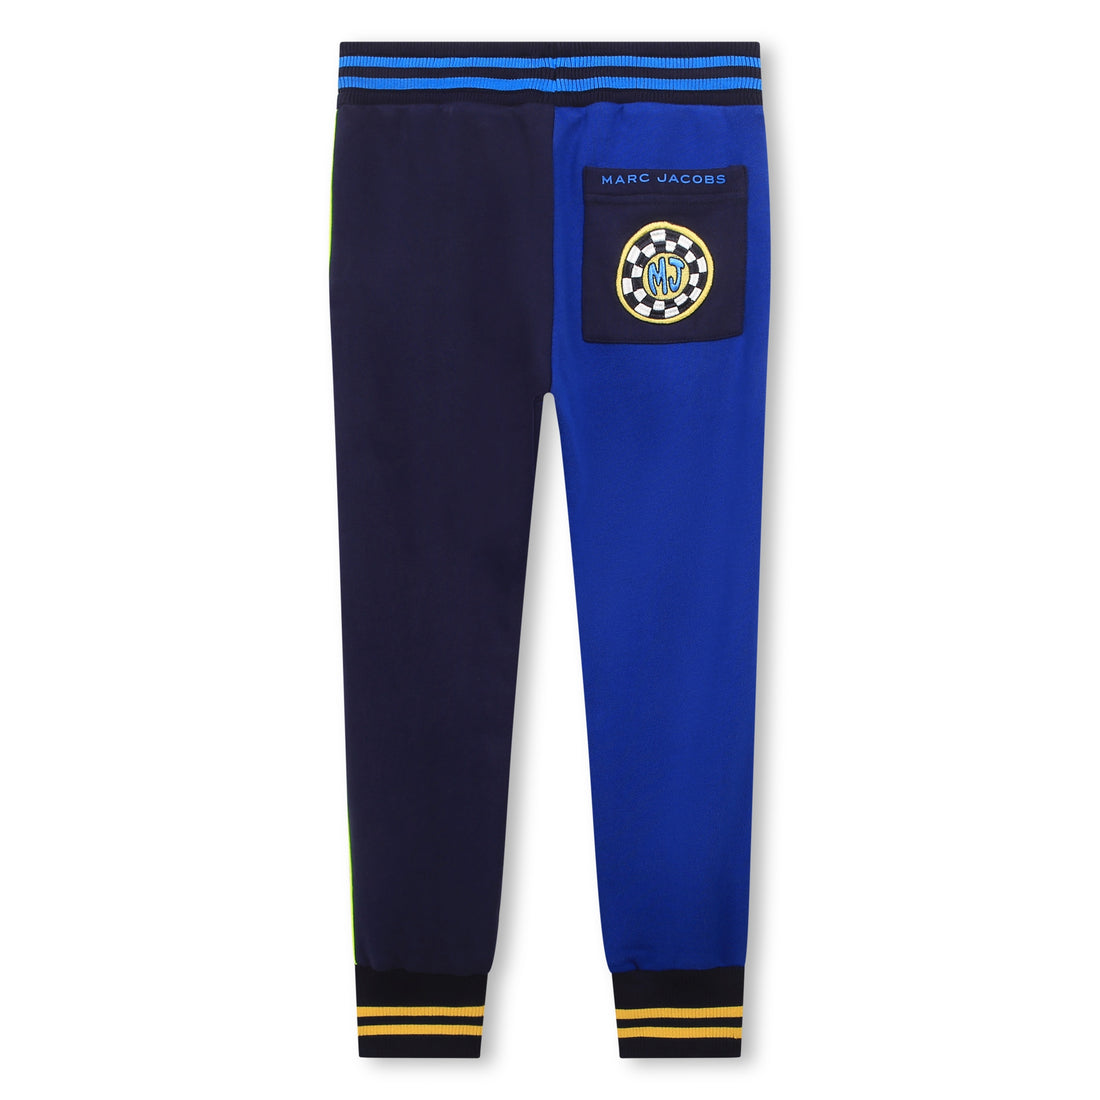 The Marc Jacobs Jogging Bottoms Style: W24291